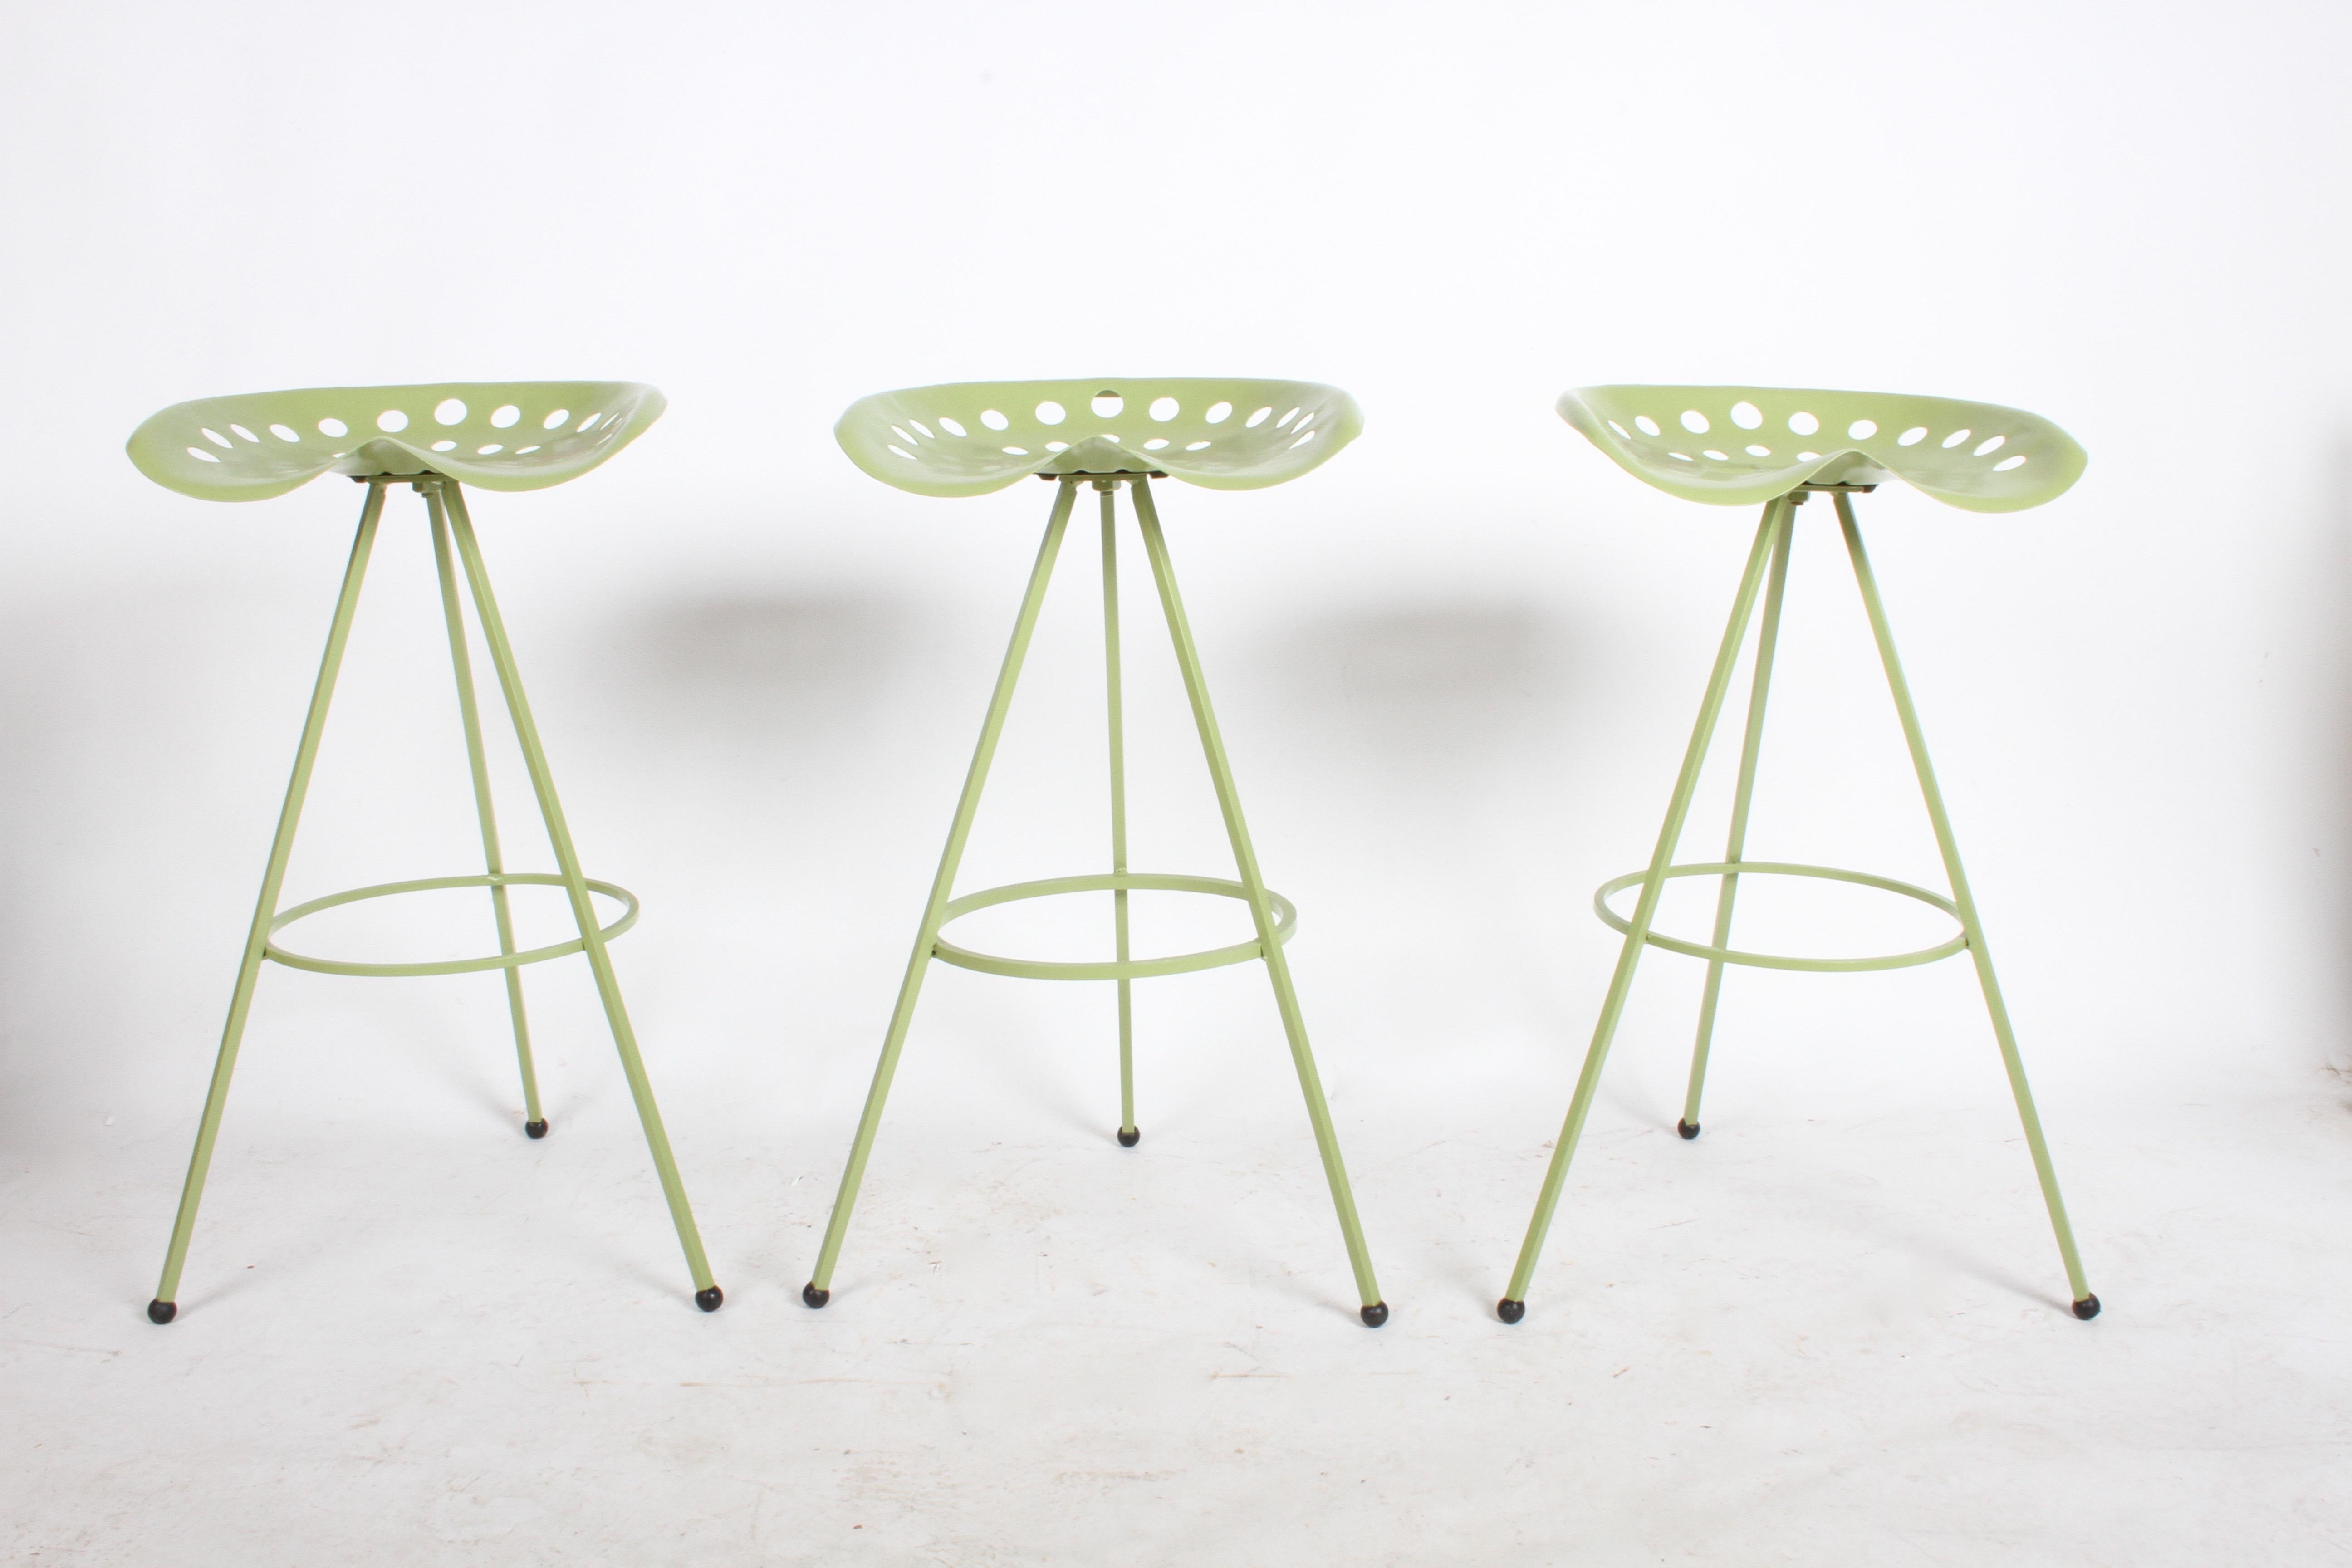 Fully restored set of three vintage Mid-Century Modern tractor seat bar stools on a tripod base with original glides. They have been sandblasted, primed and painted green. The green was a match of the original color of the tractor seat. Can be